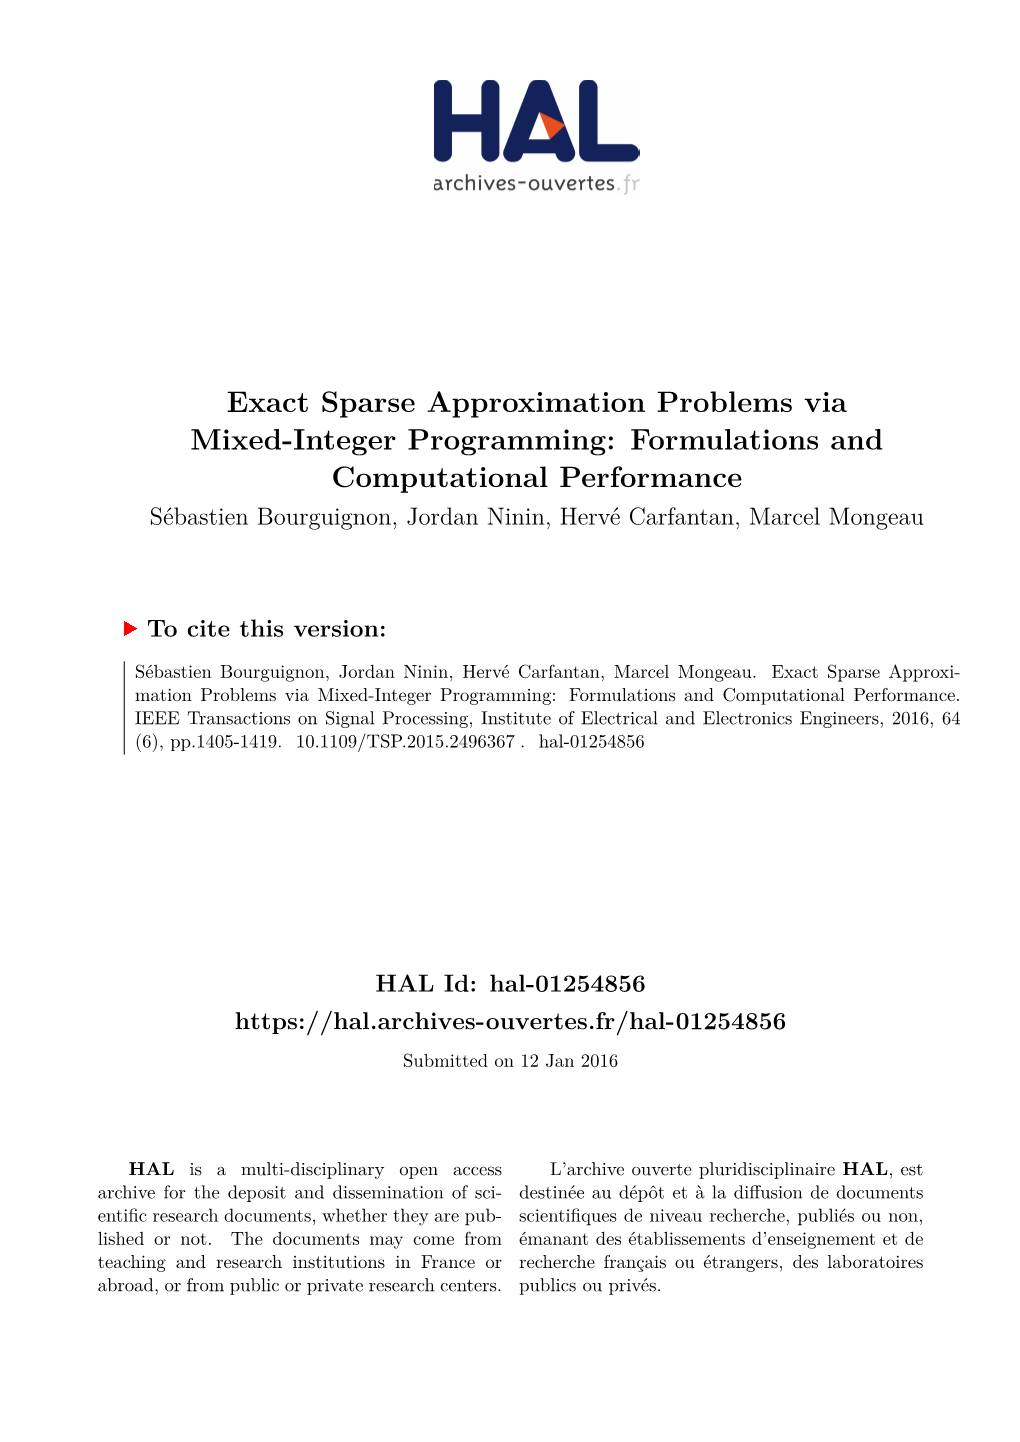 Exact Sparse Approximation Problems Via Mixed-Integer Programming: Formulations and Computational Performance